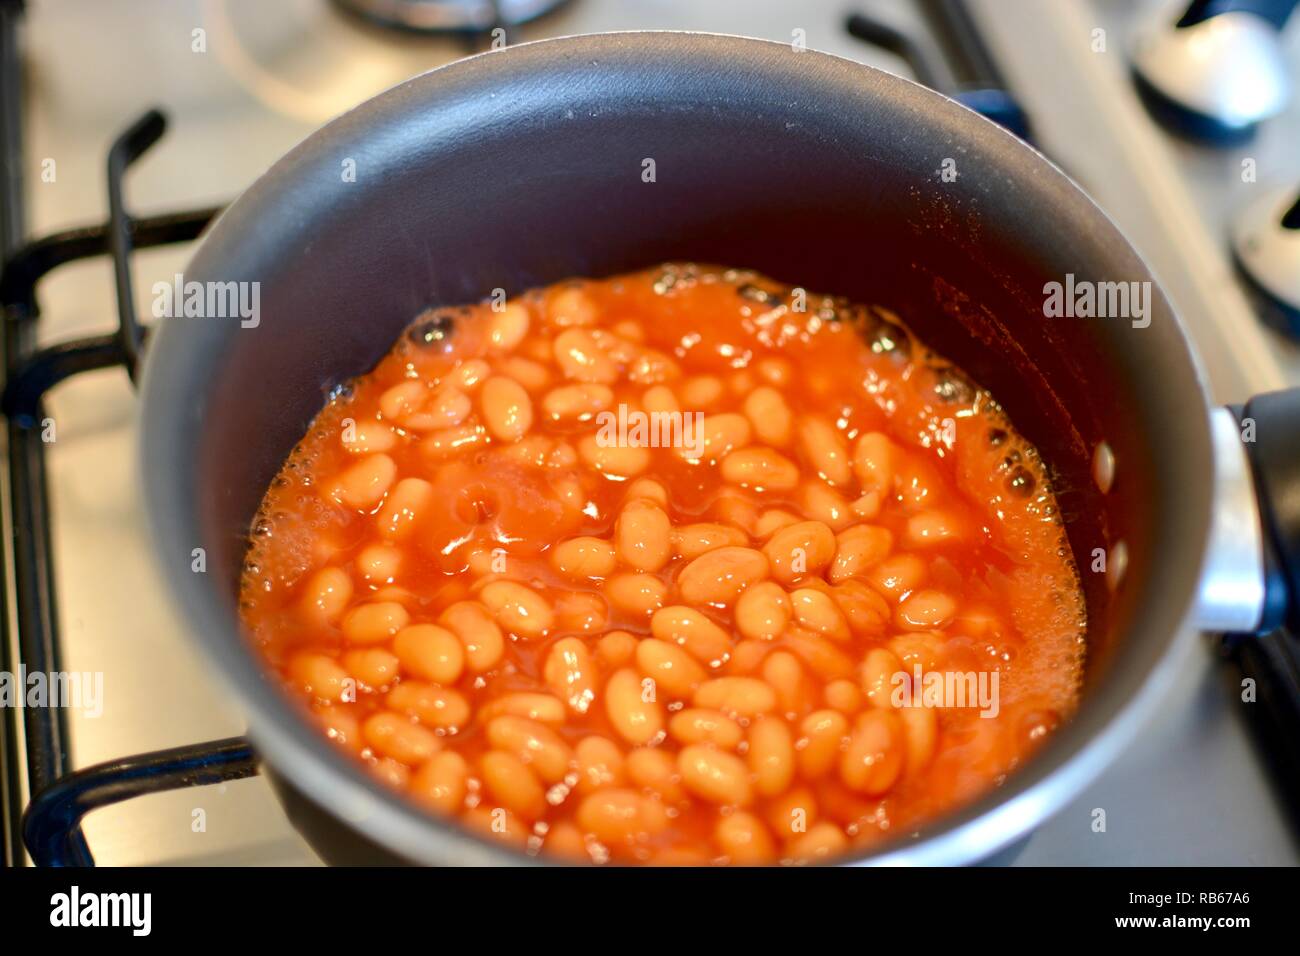 Cooking baked beans in a sauce pan on a gas hob Stock Photo